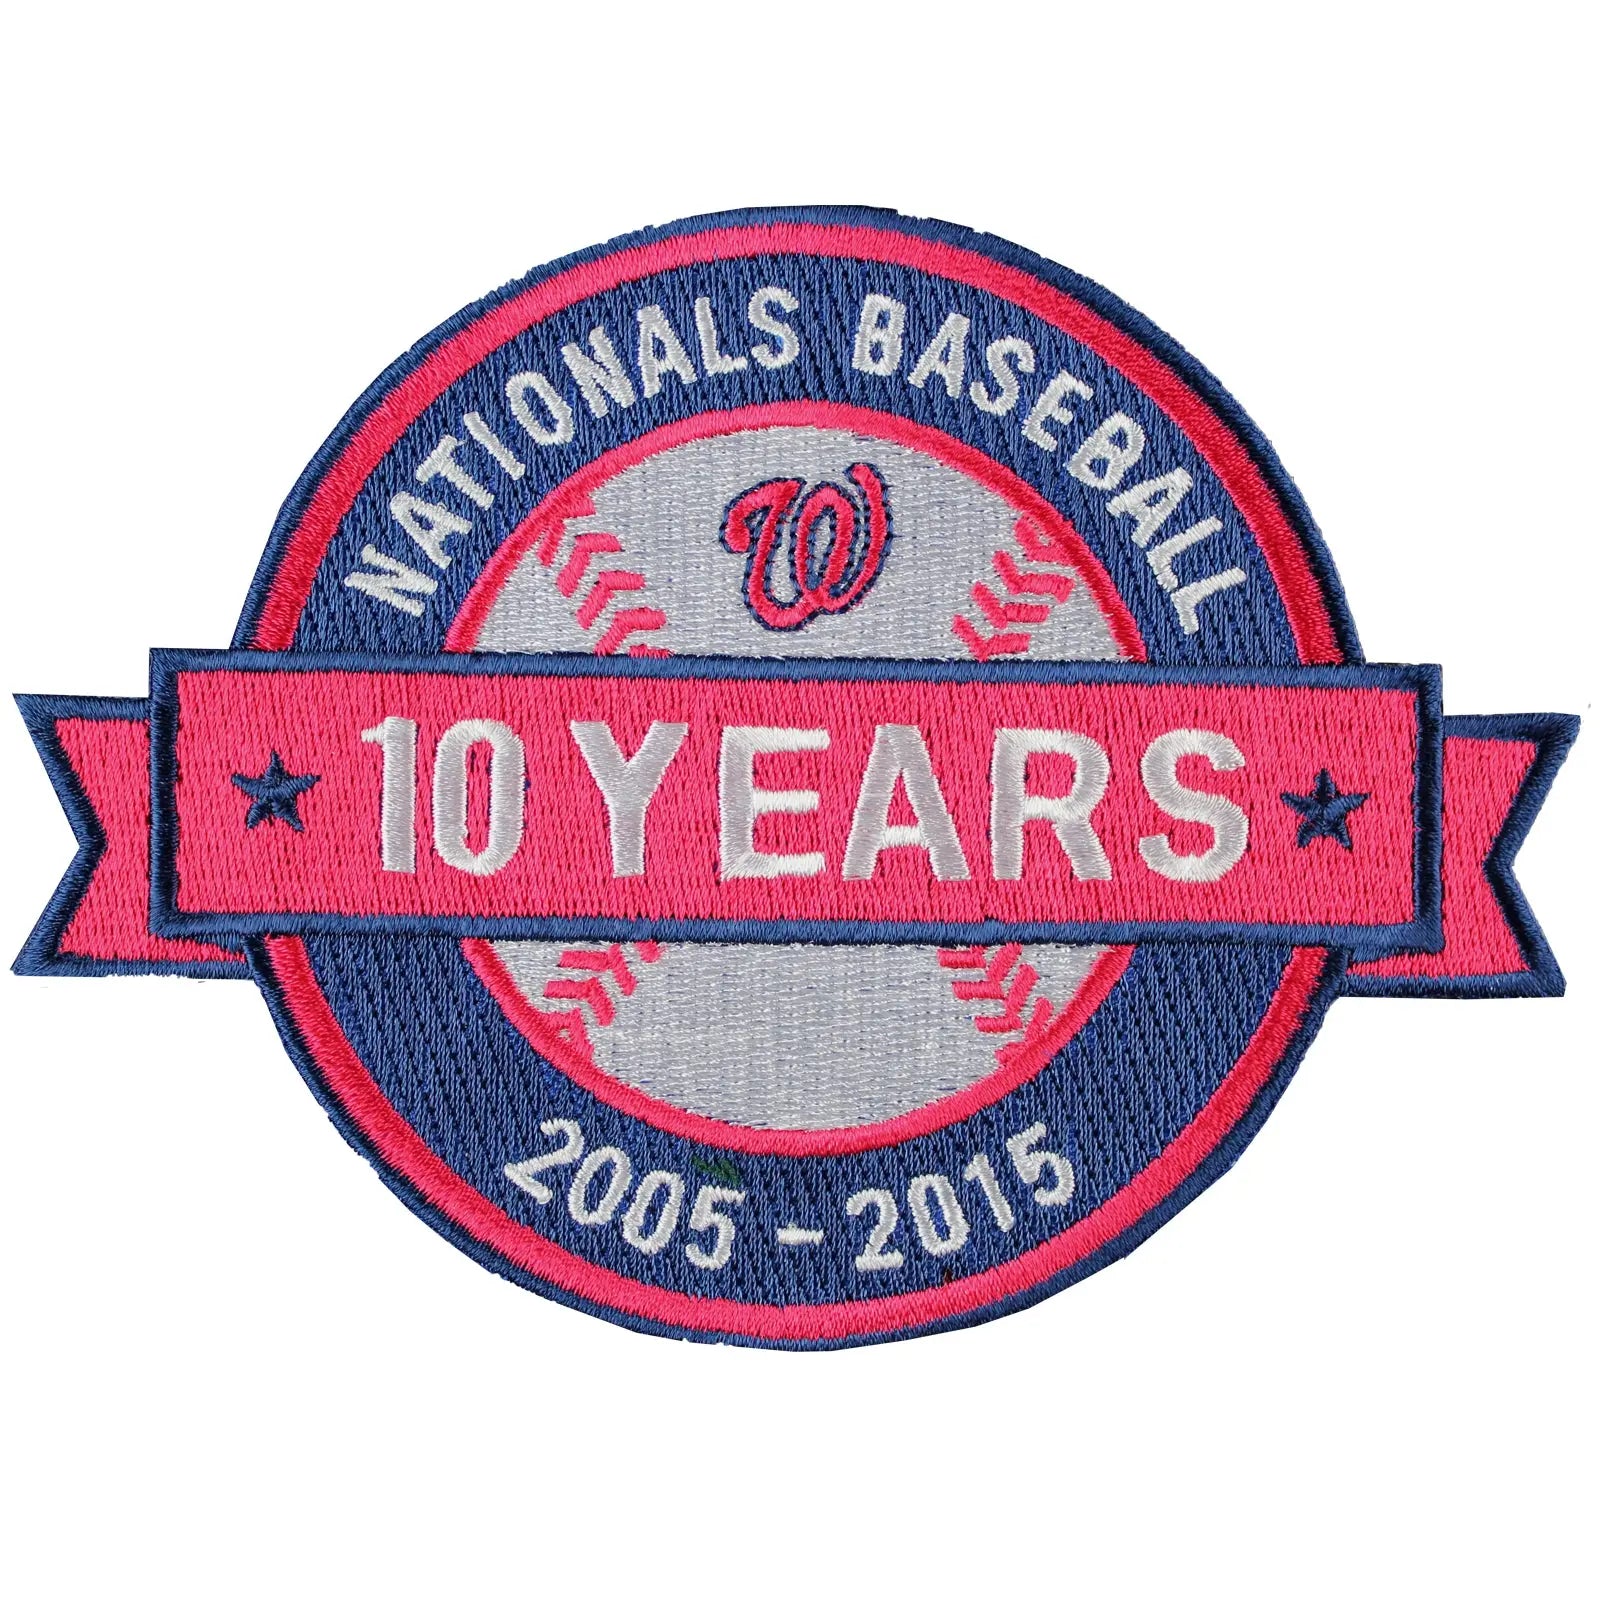 Washington Nationals 10 Years Anniversary and Commemorative Patch